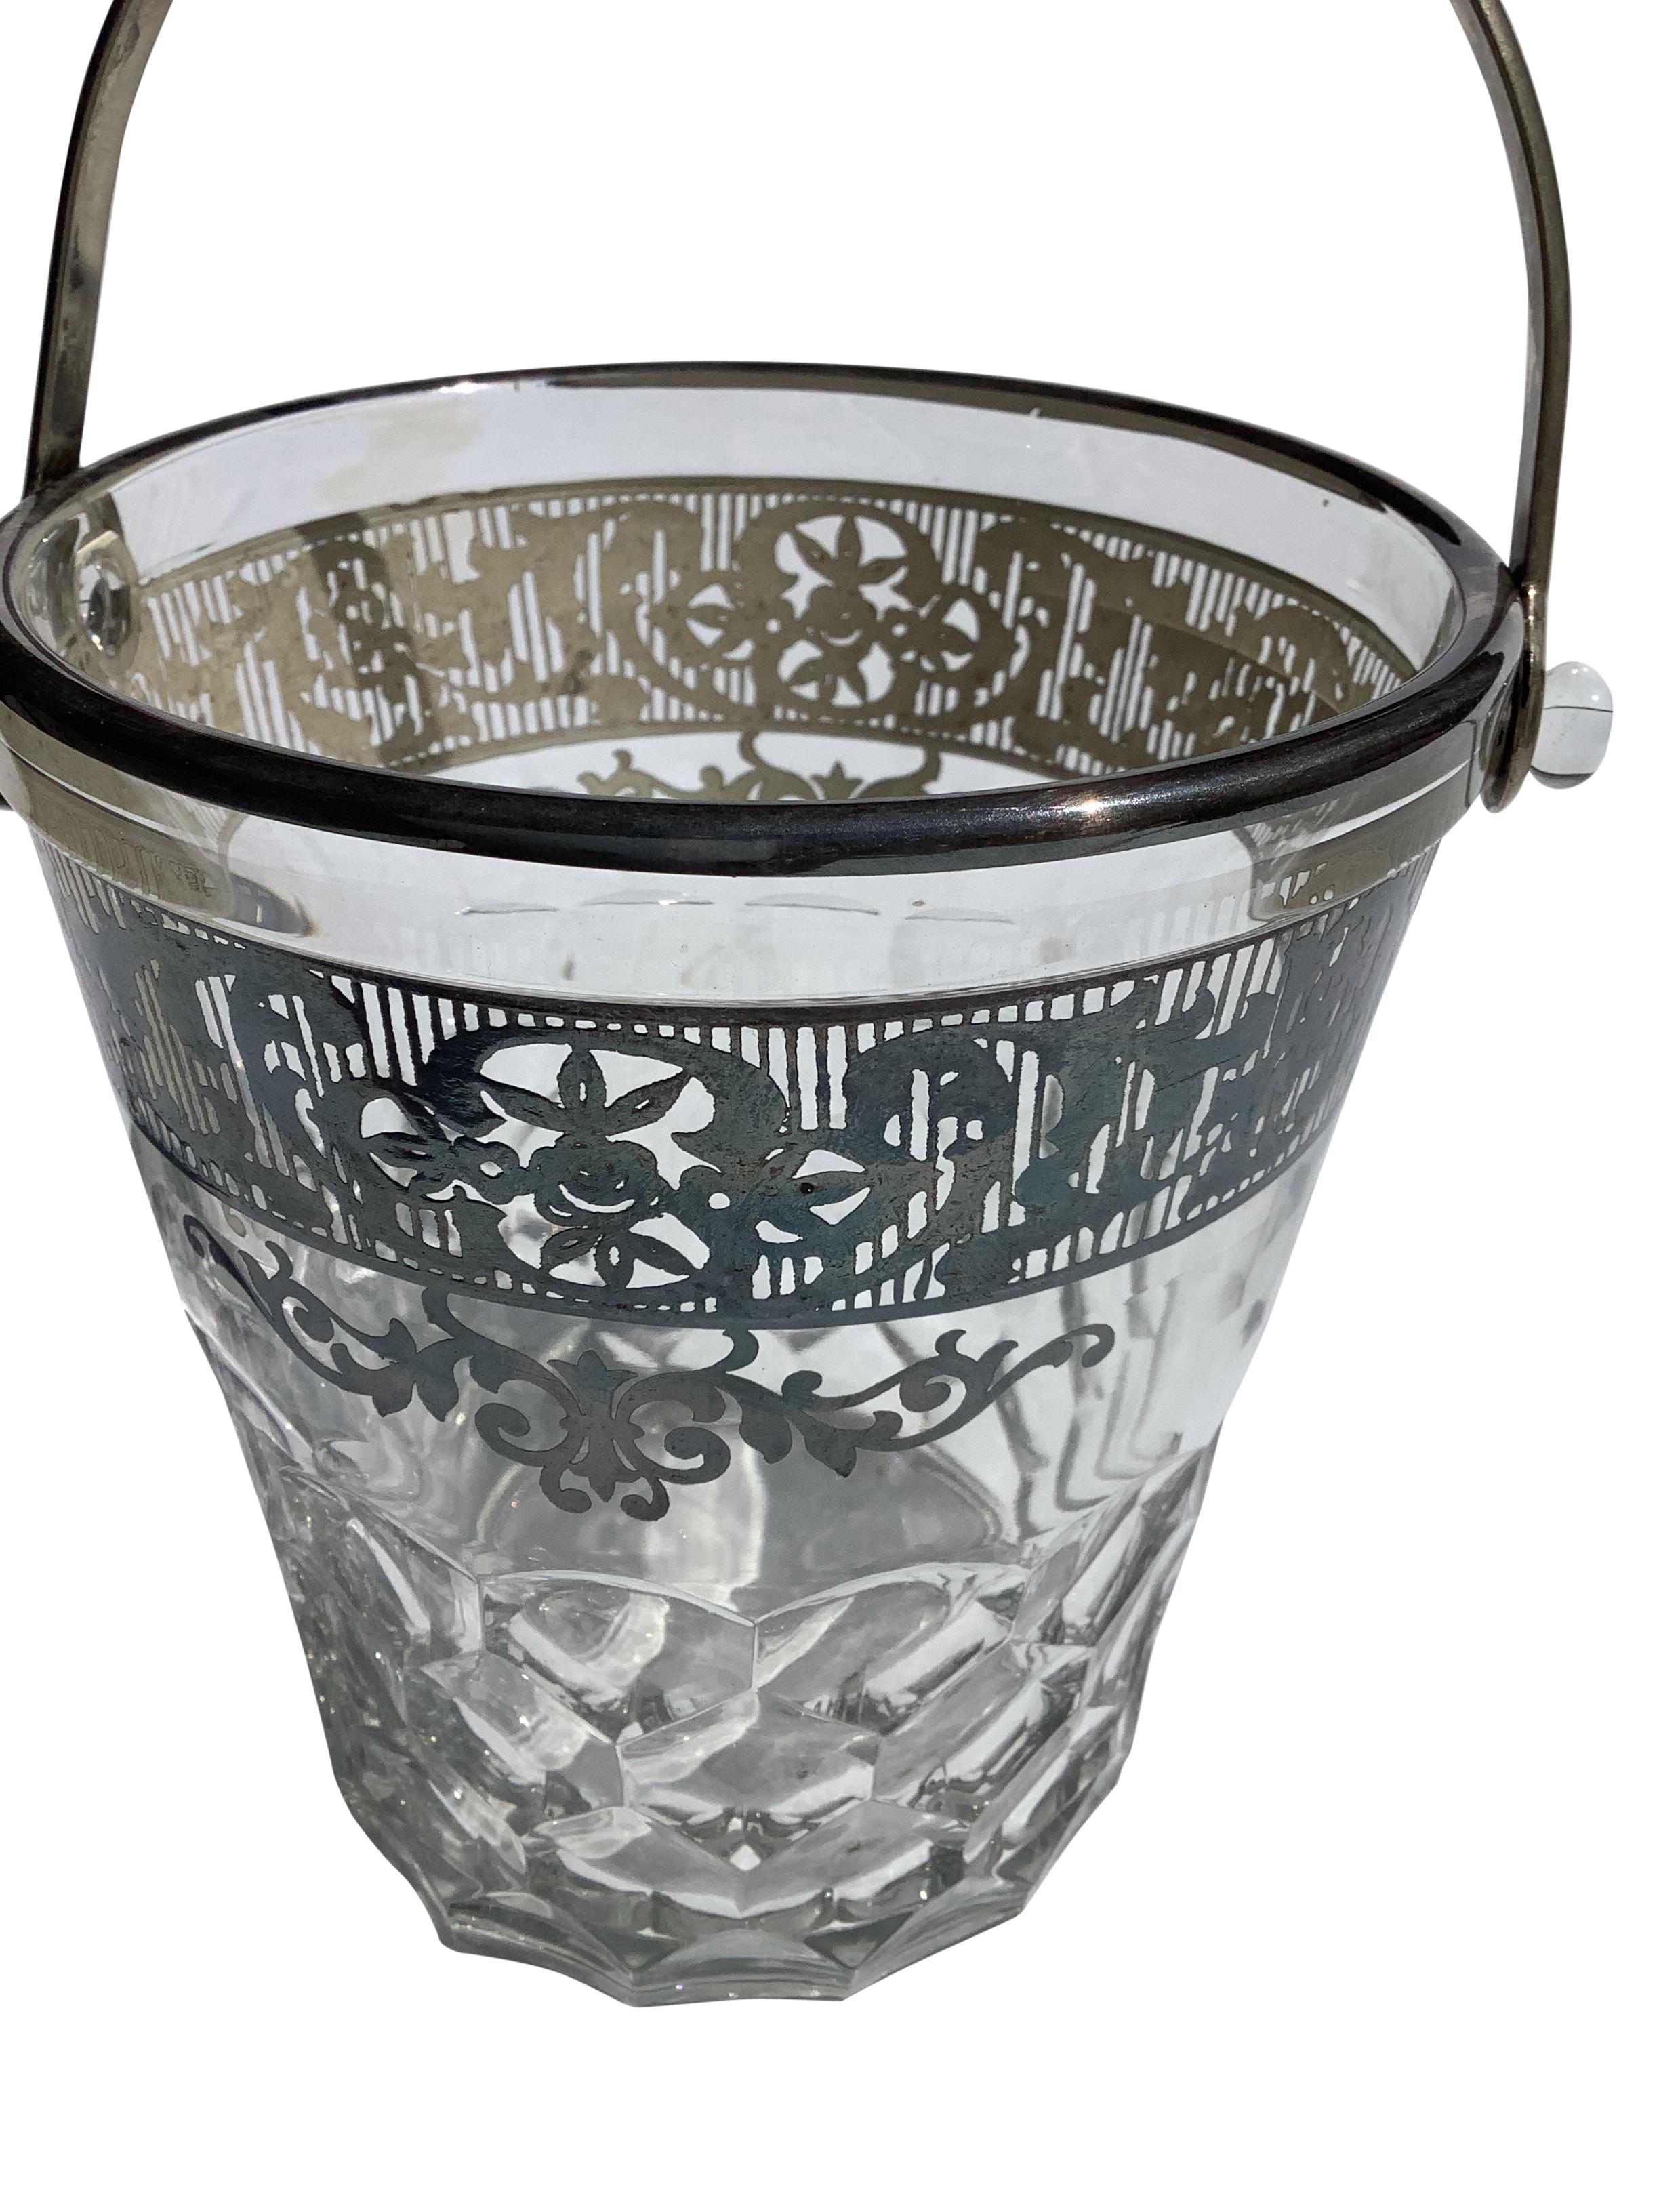 Art Deco glass ice bucket with a nickel handle. Molded bucket with a faceted design. Top of bucket has silver overlay band with intricate pierced design.
